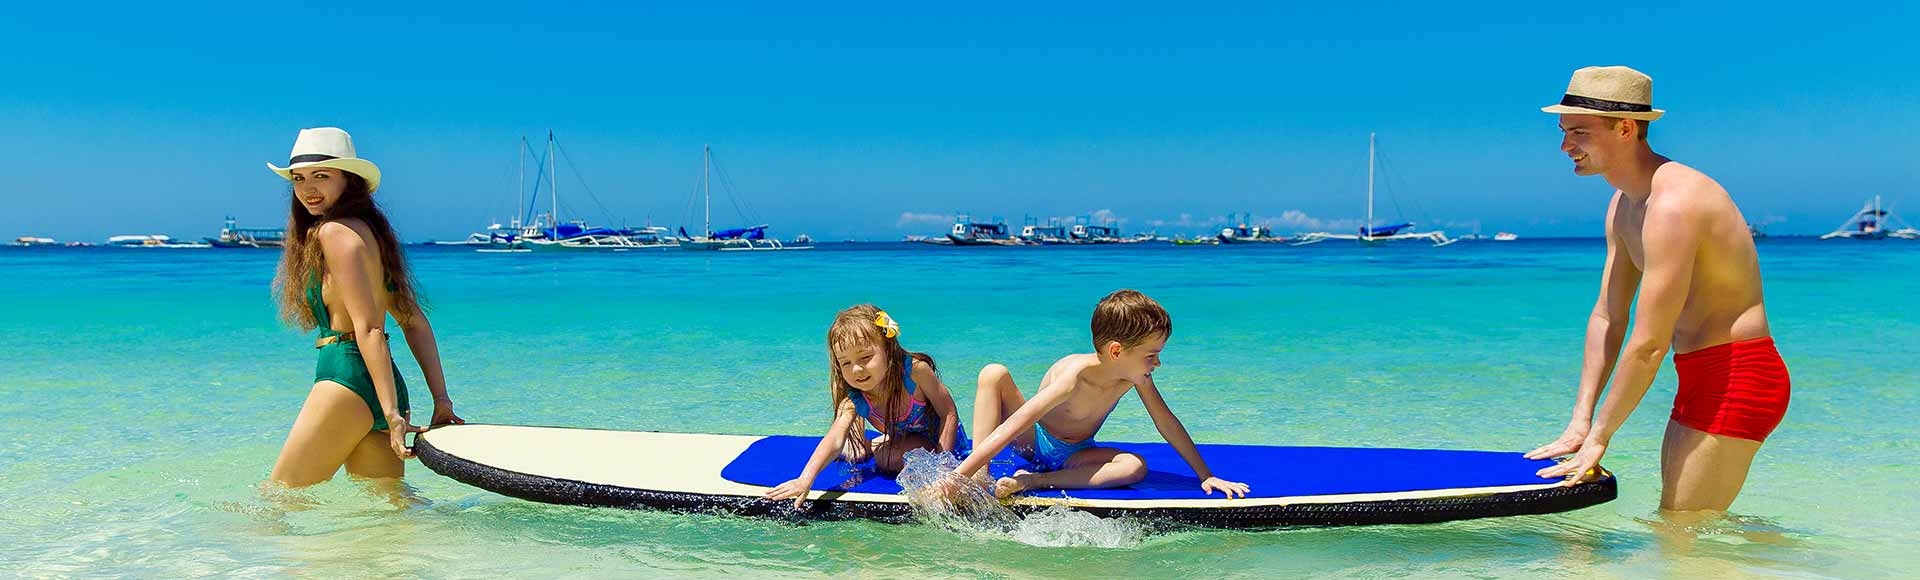 10 Unique Watersports and Water Activities